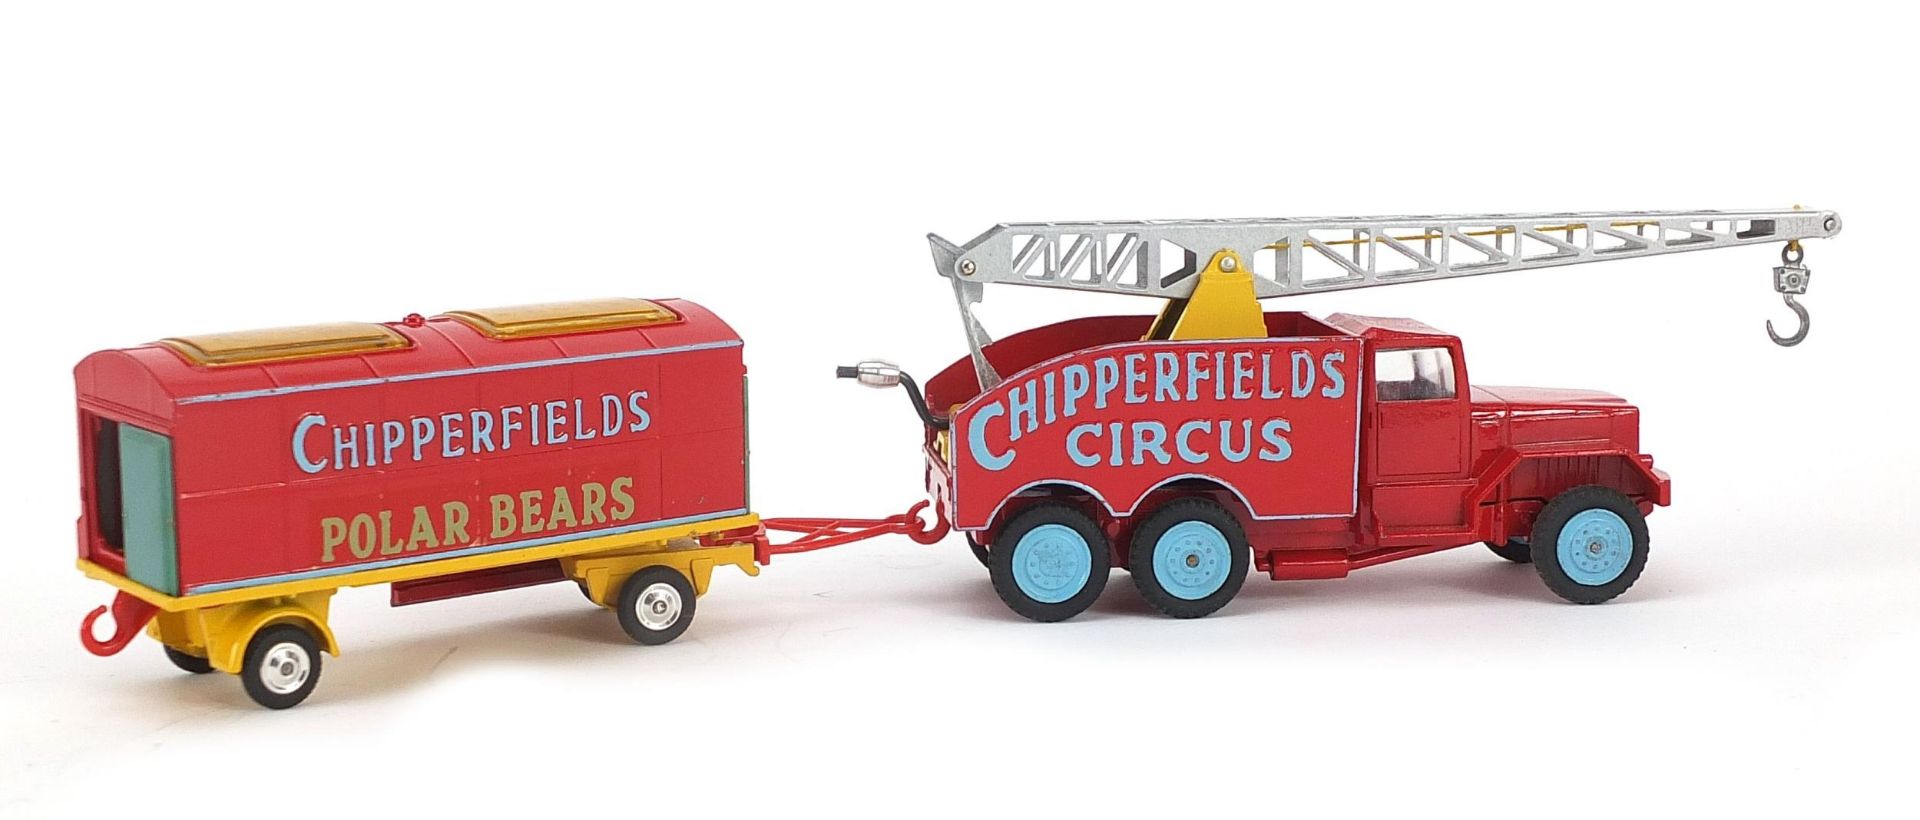 Corgi Toys Major Chipperfield's Circus crane, truck and cage with box, gift set no 12 - Image 3 of 5